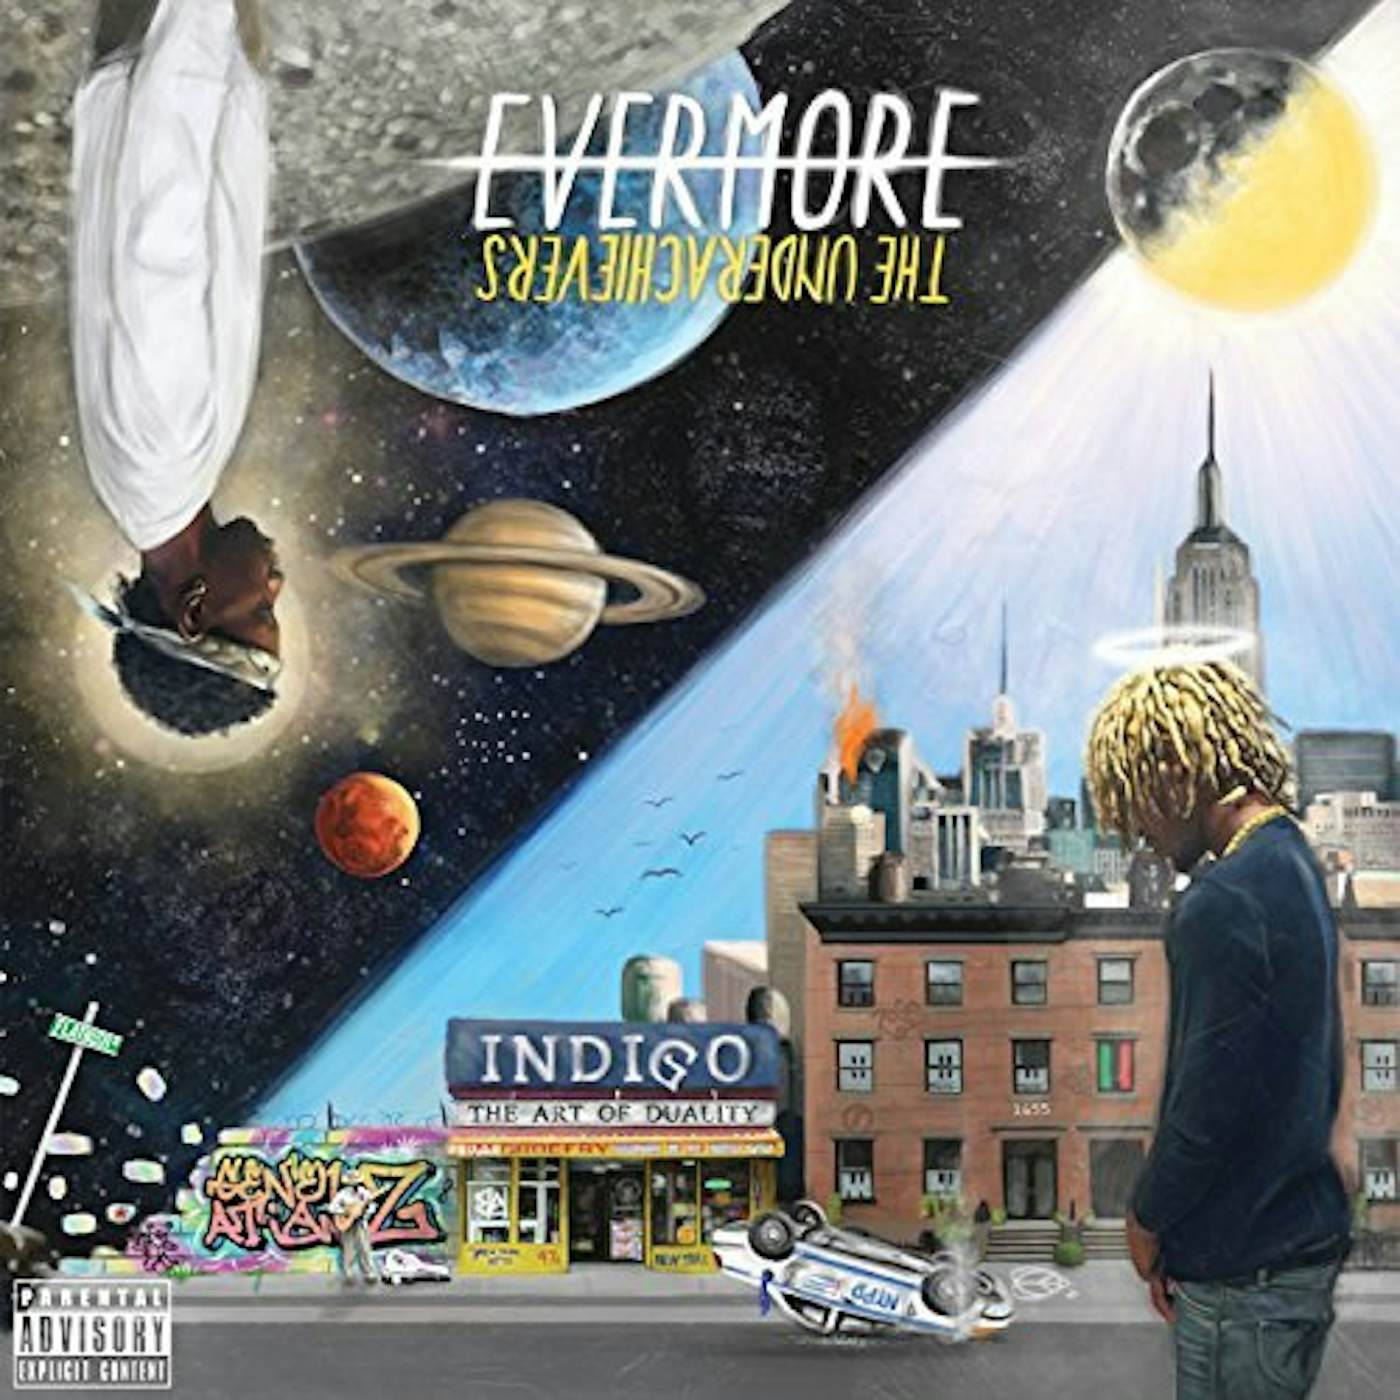 The Underachievers EVERMORE - THE ART OF DUALITY CD